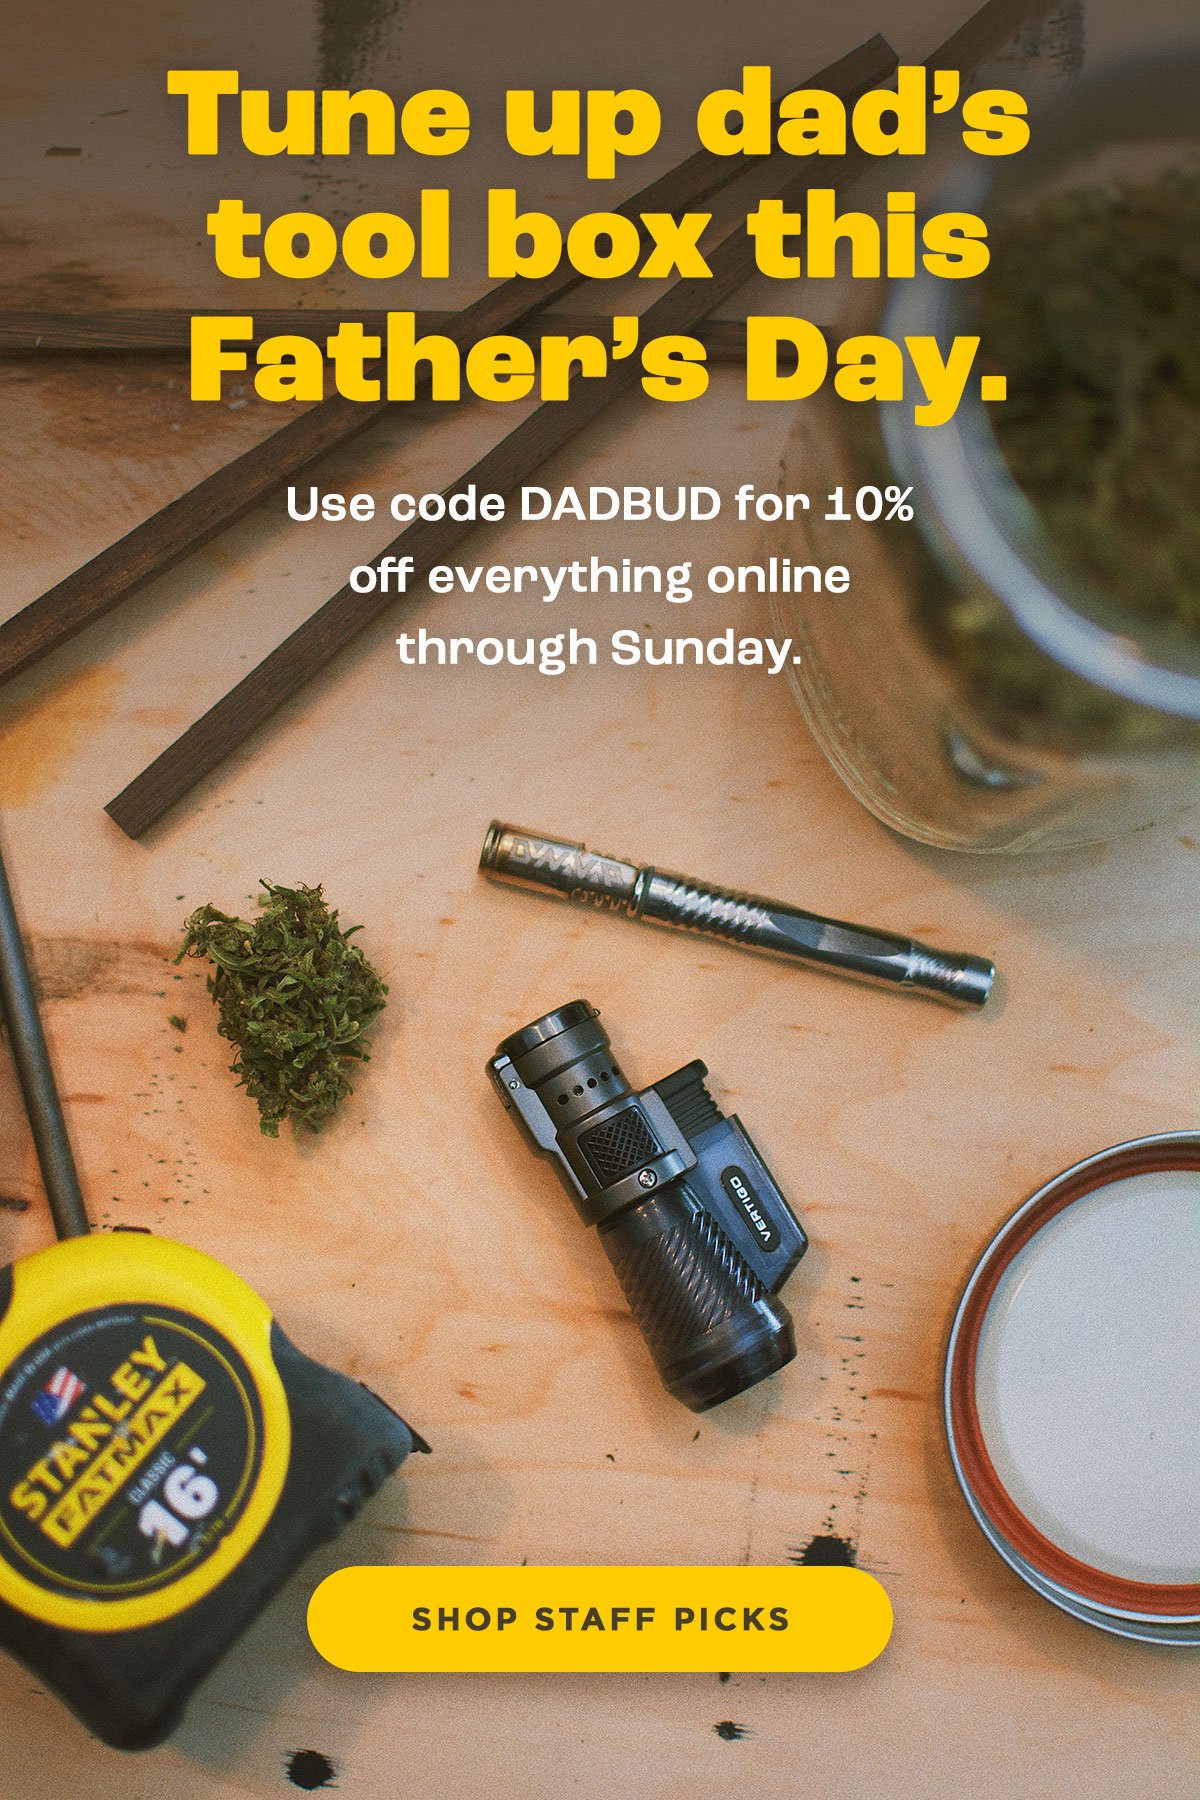 Use code DADBUD for 10% Off Sitewide